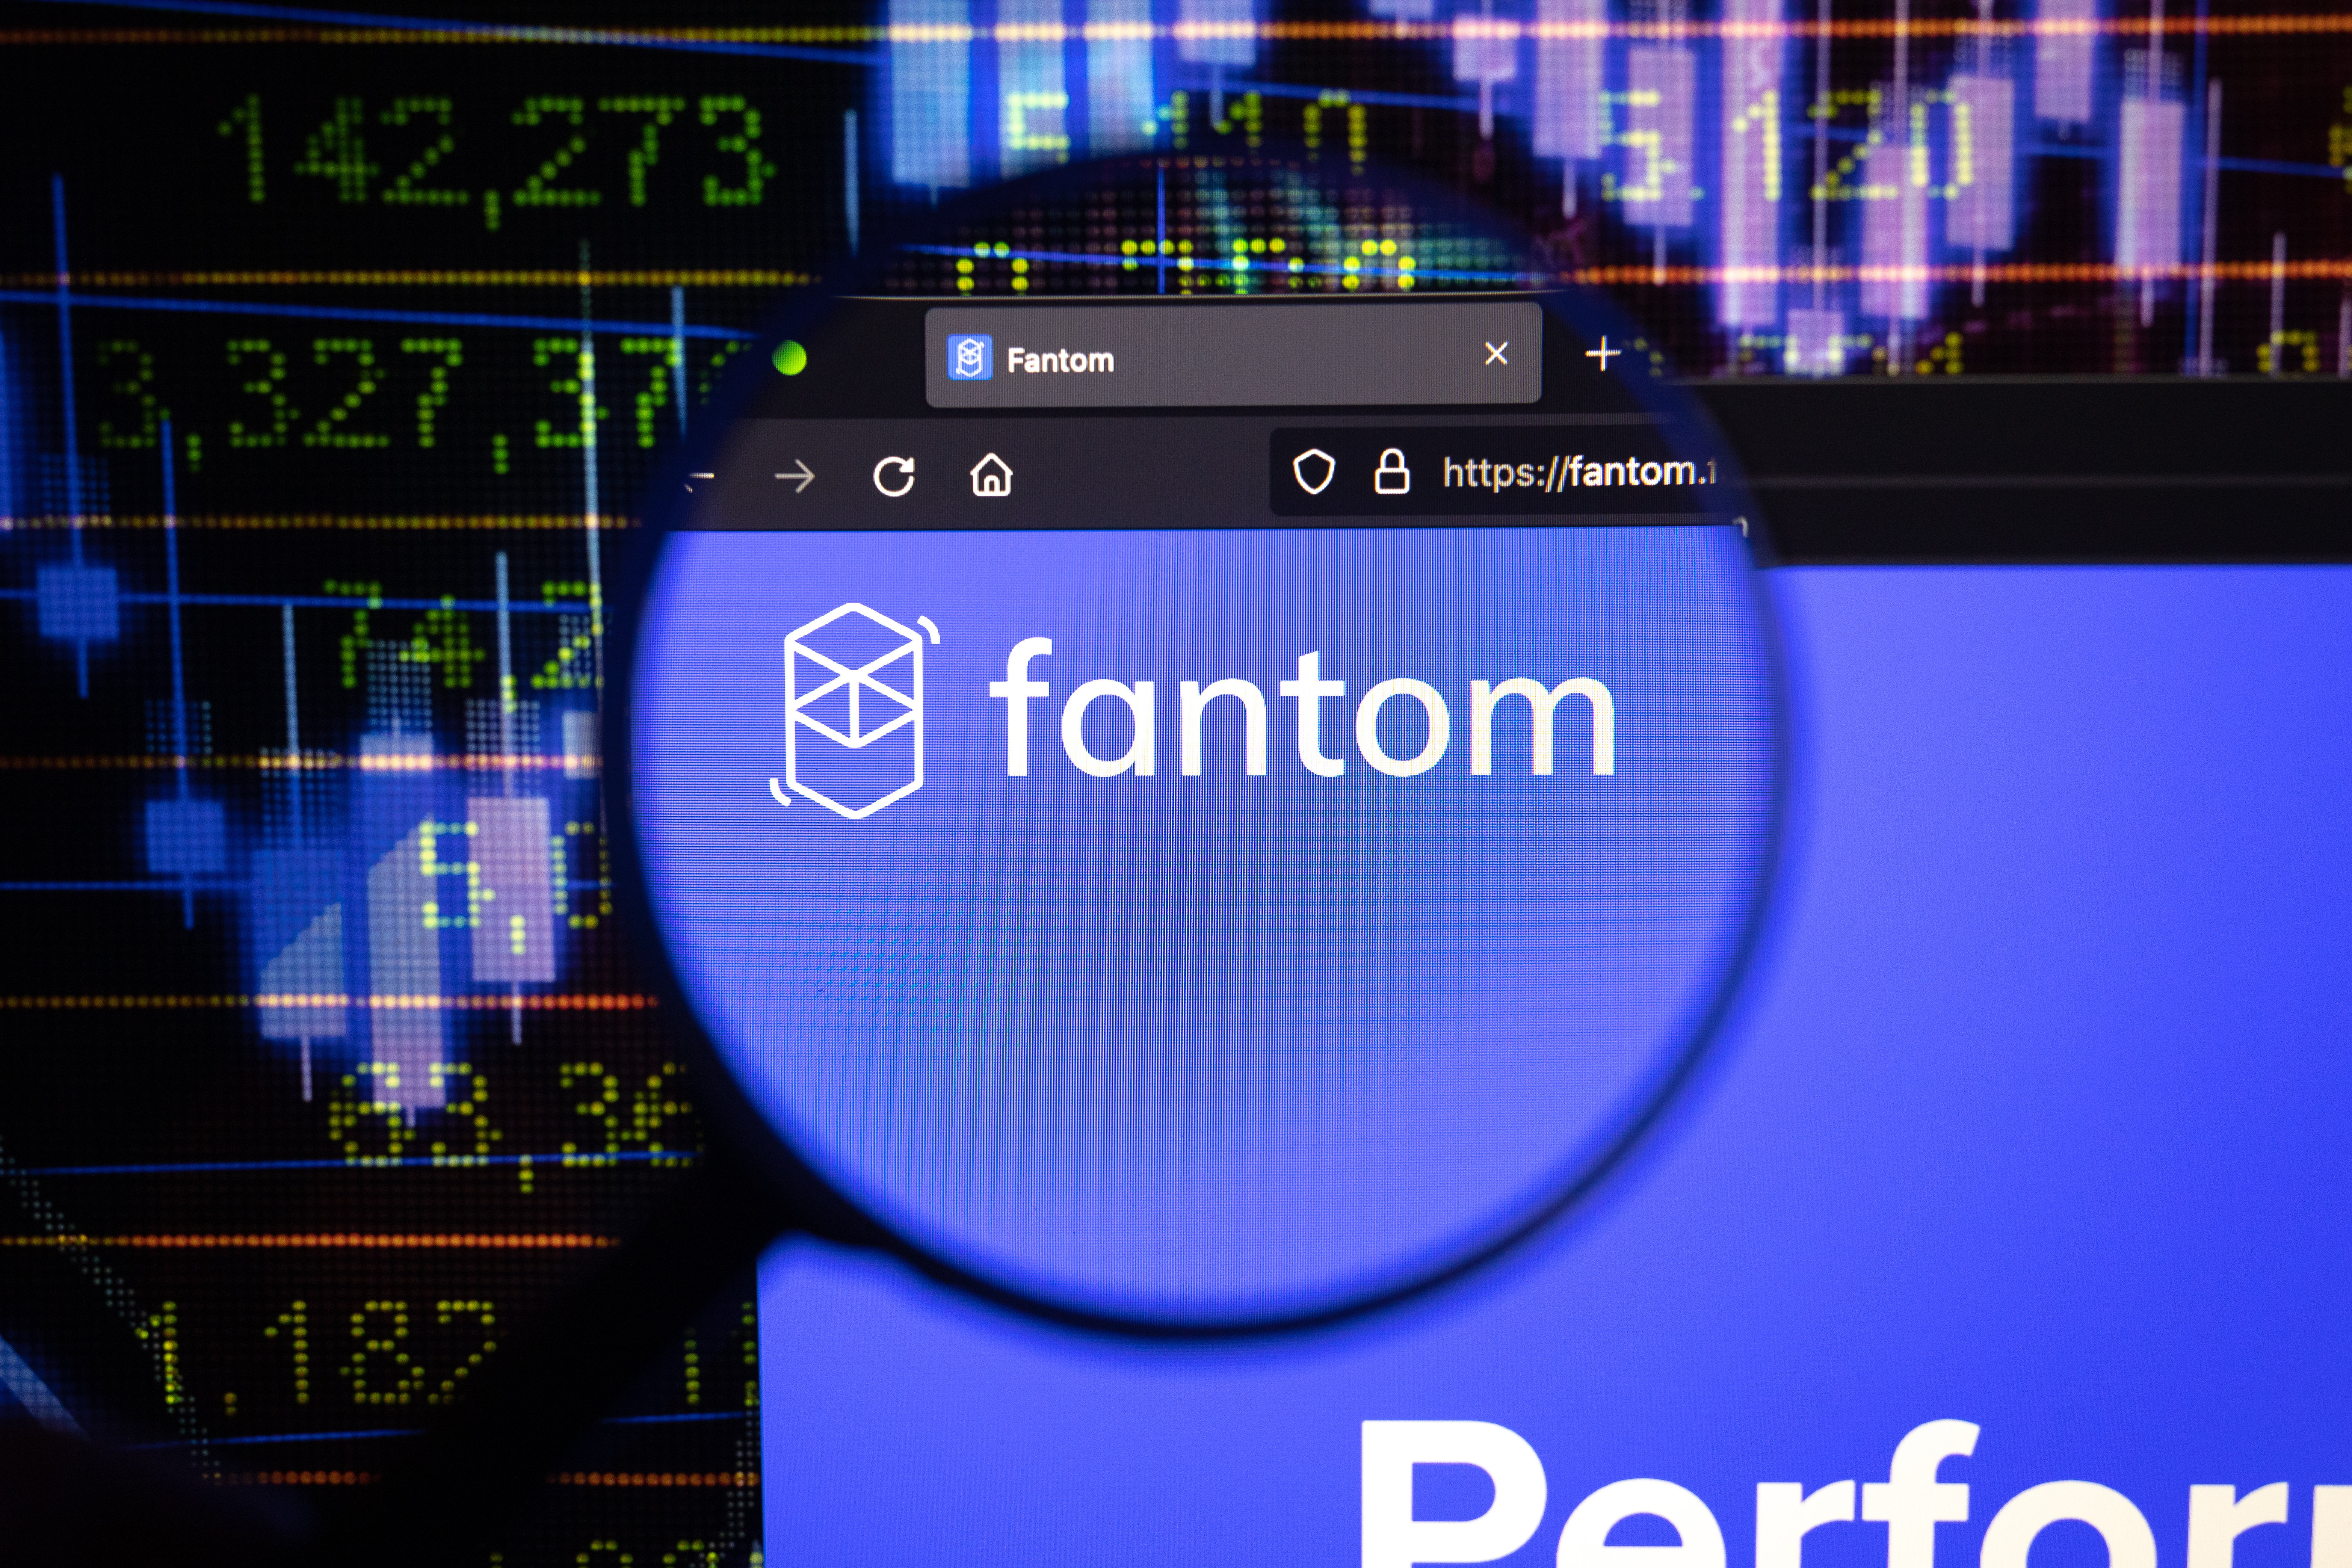 While Fantom Price Explodes, These Lesser-Known Altcoins May Take Off This Year – Heres Why